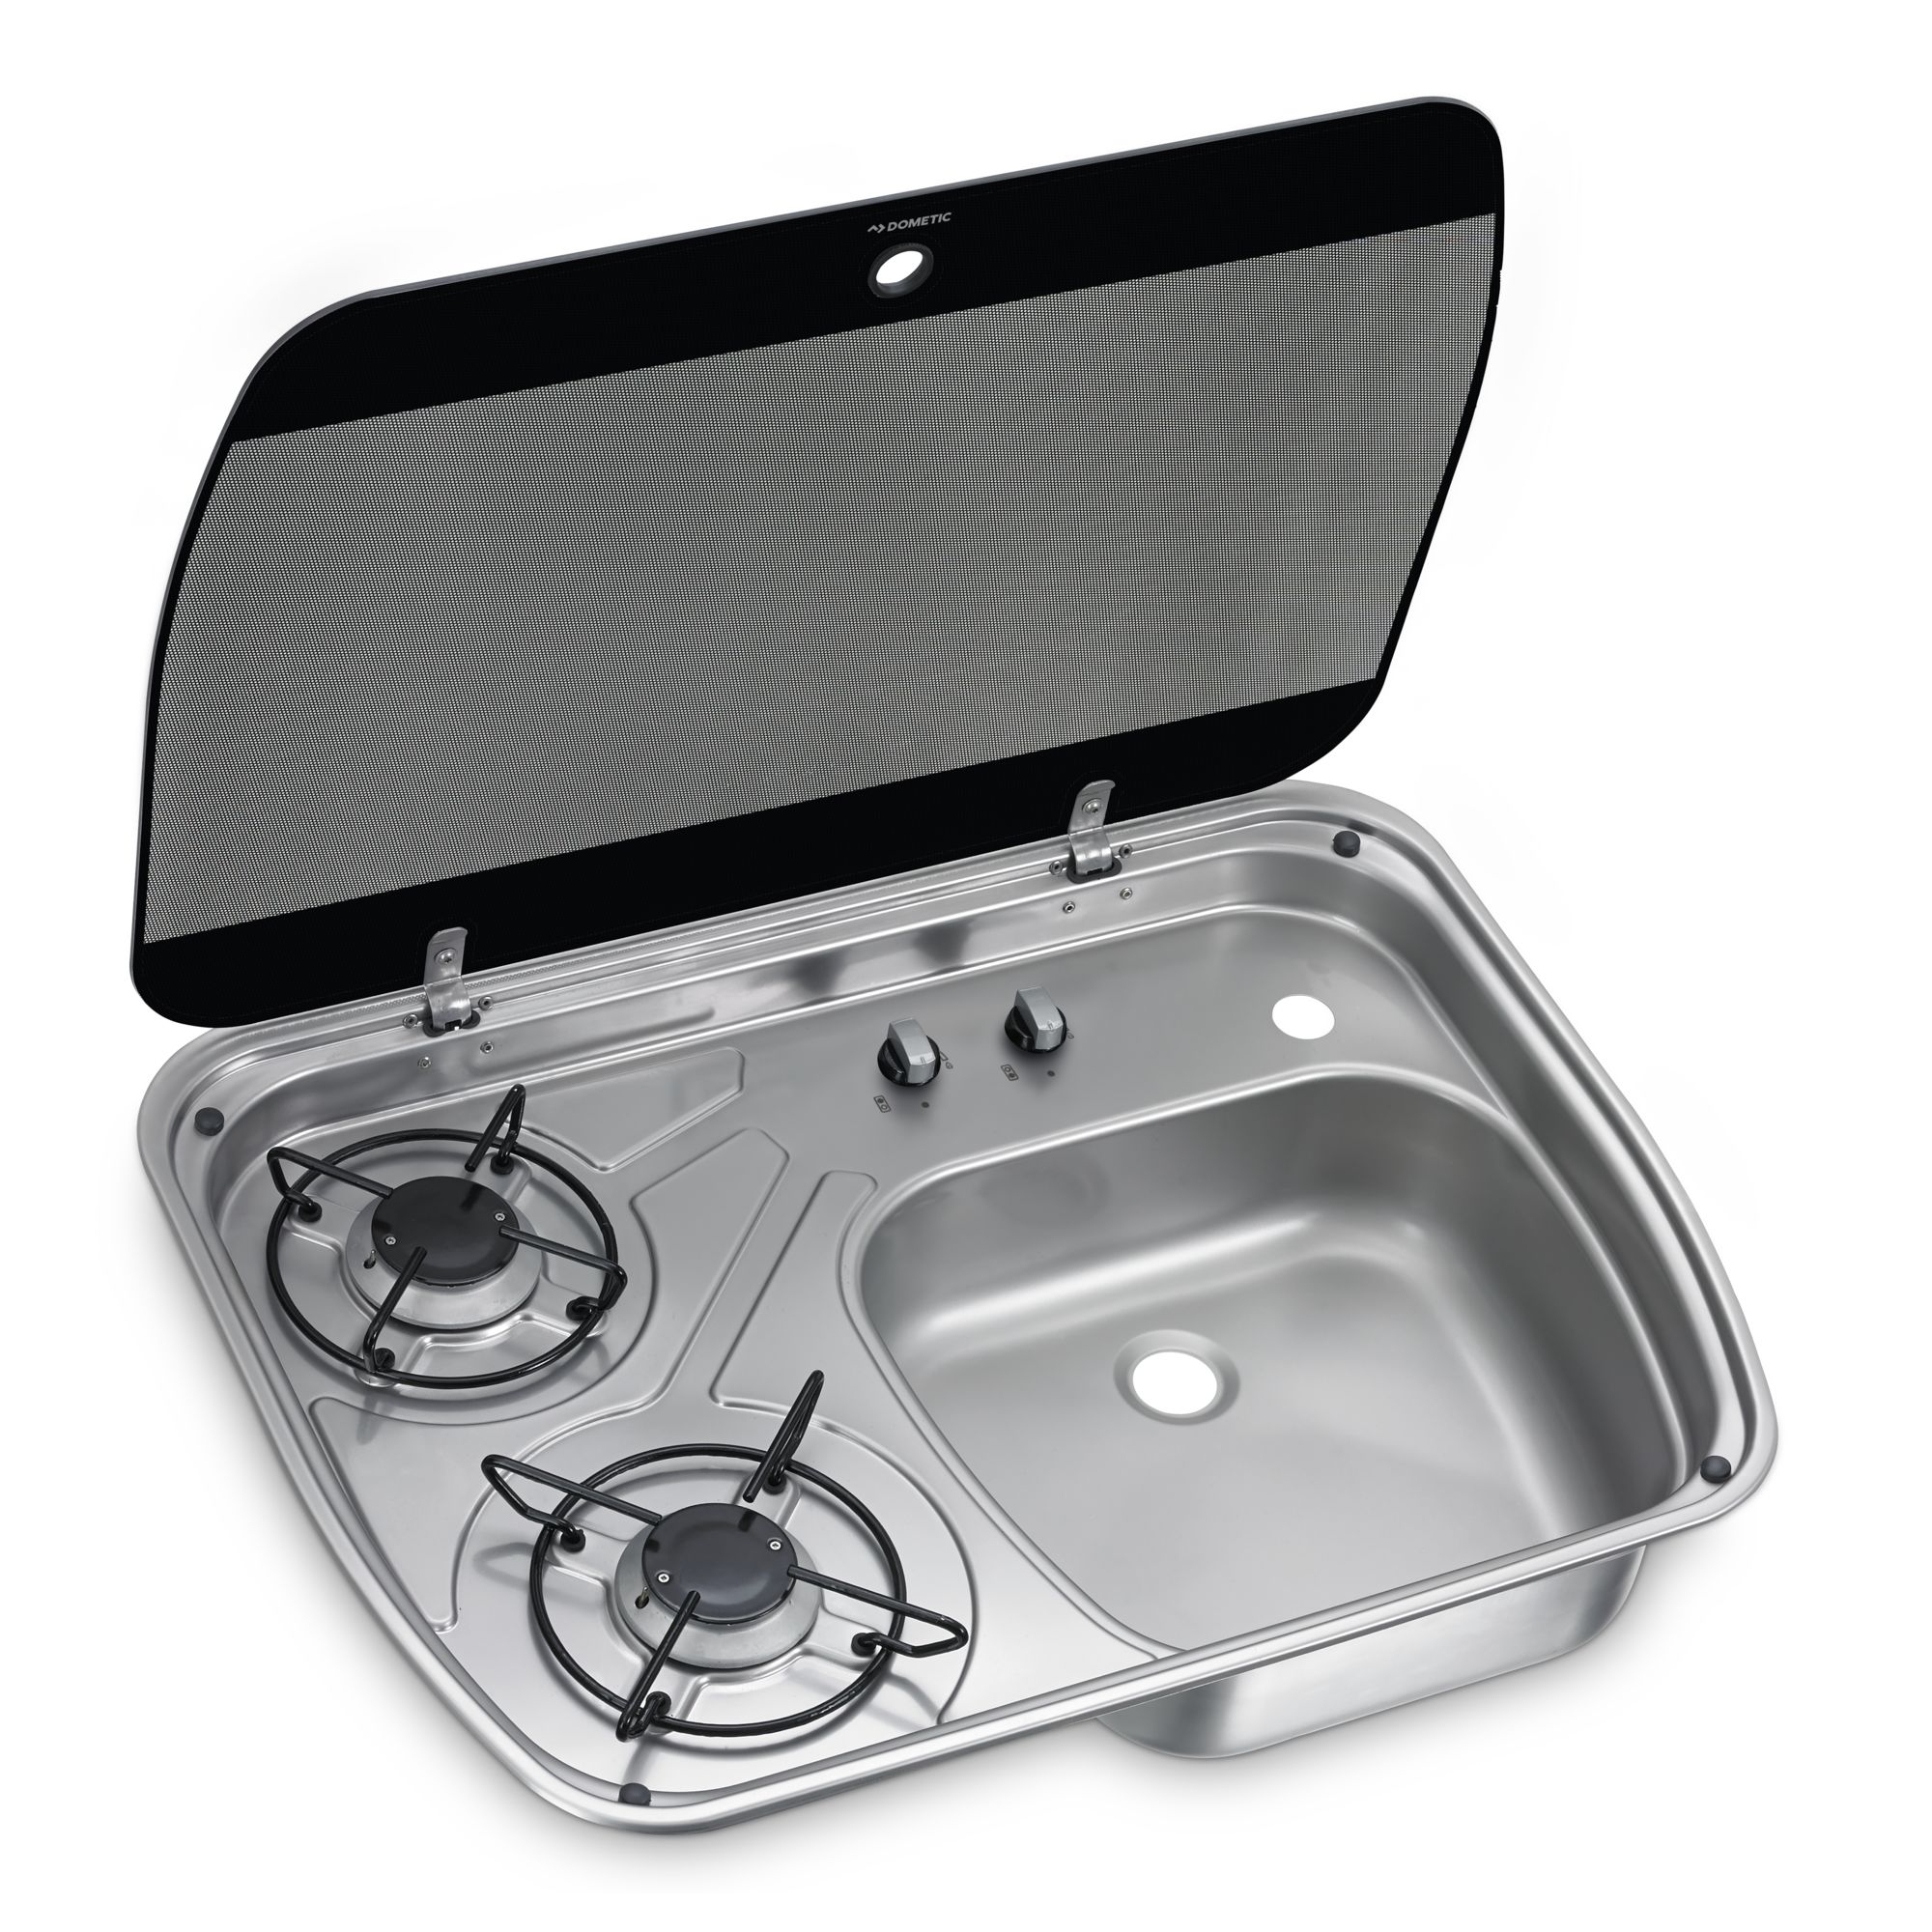 Dometic HSG 2445 2-burner gas hob and sink combination with glass lid